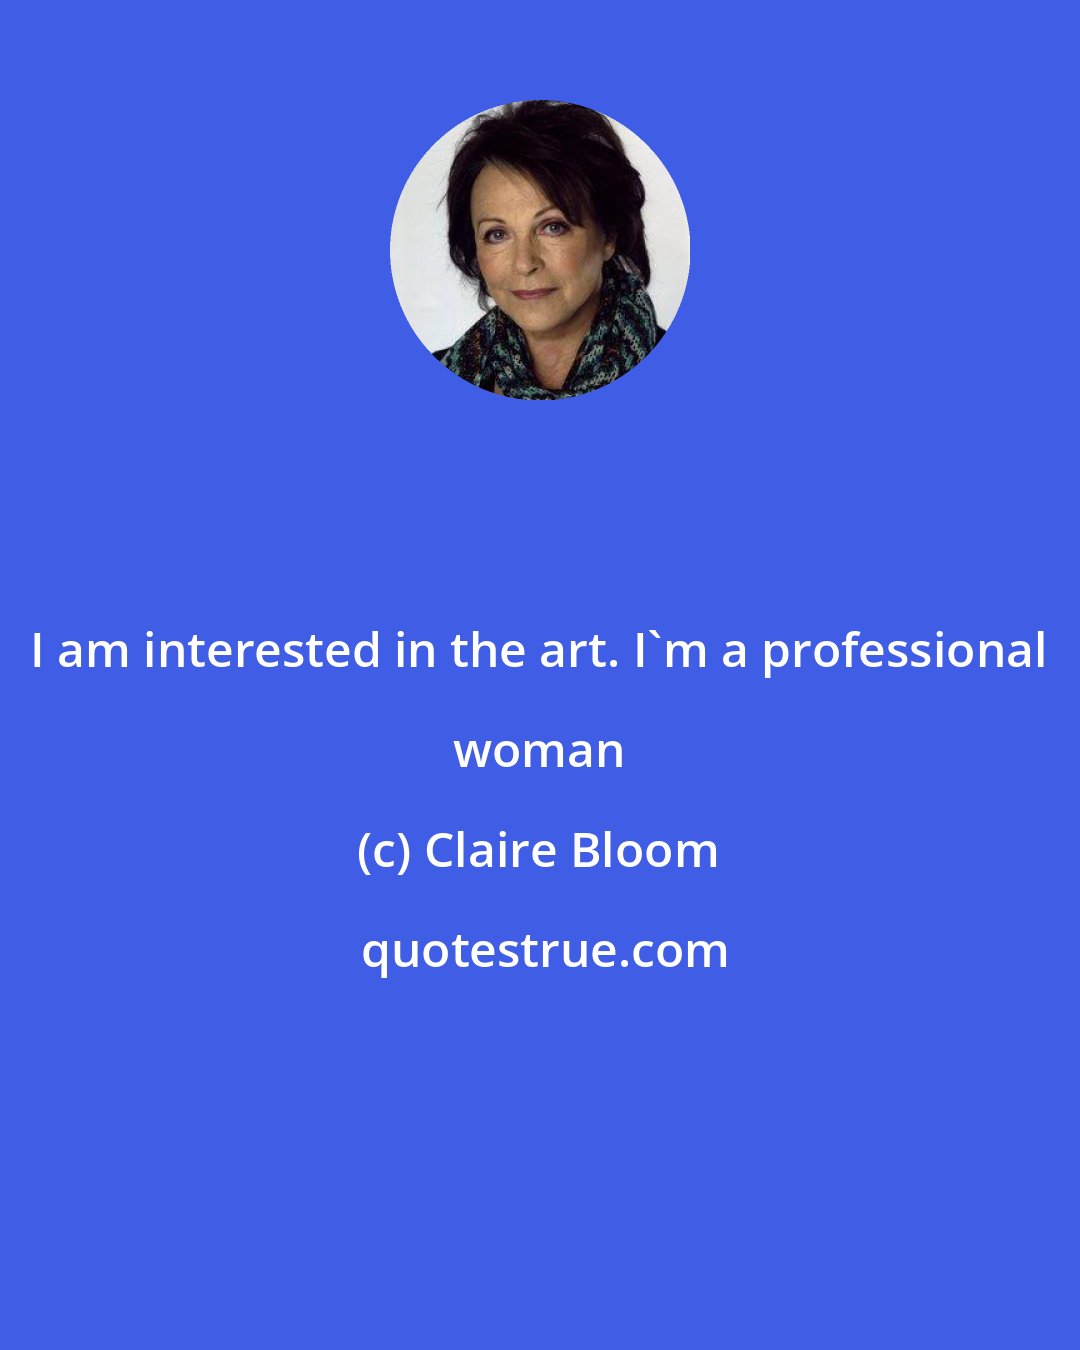 Claire Bloom: I am interested in the art. I'm a professional woman